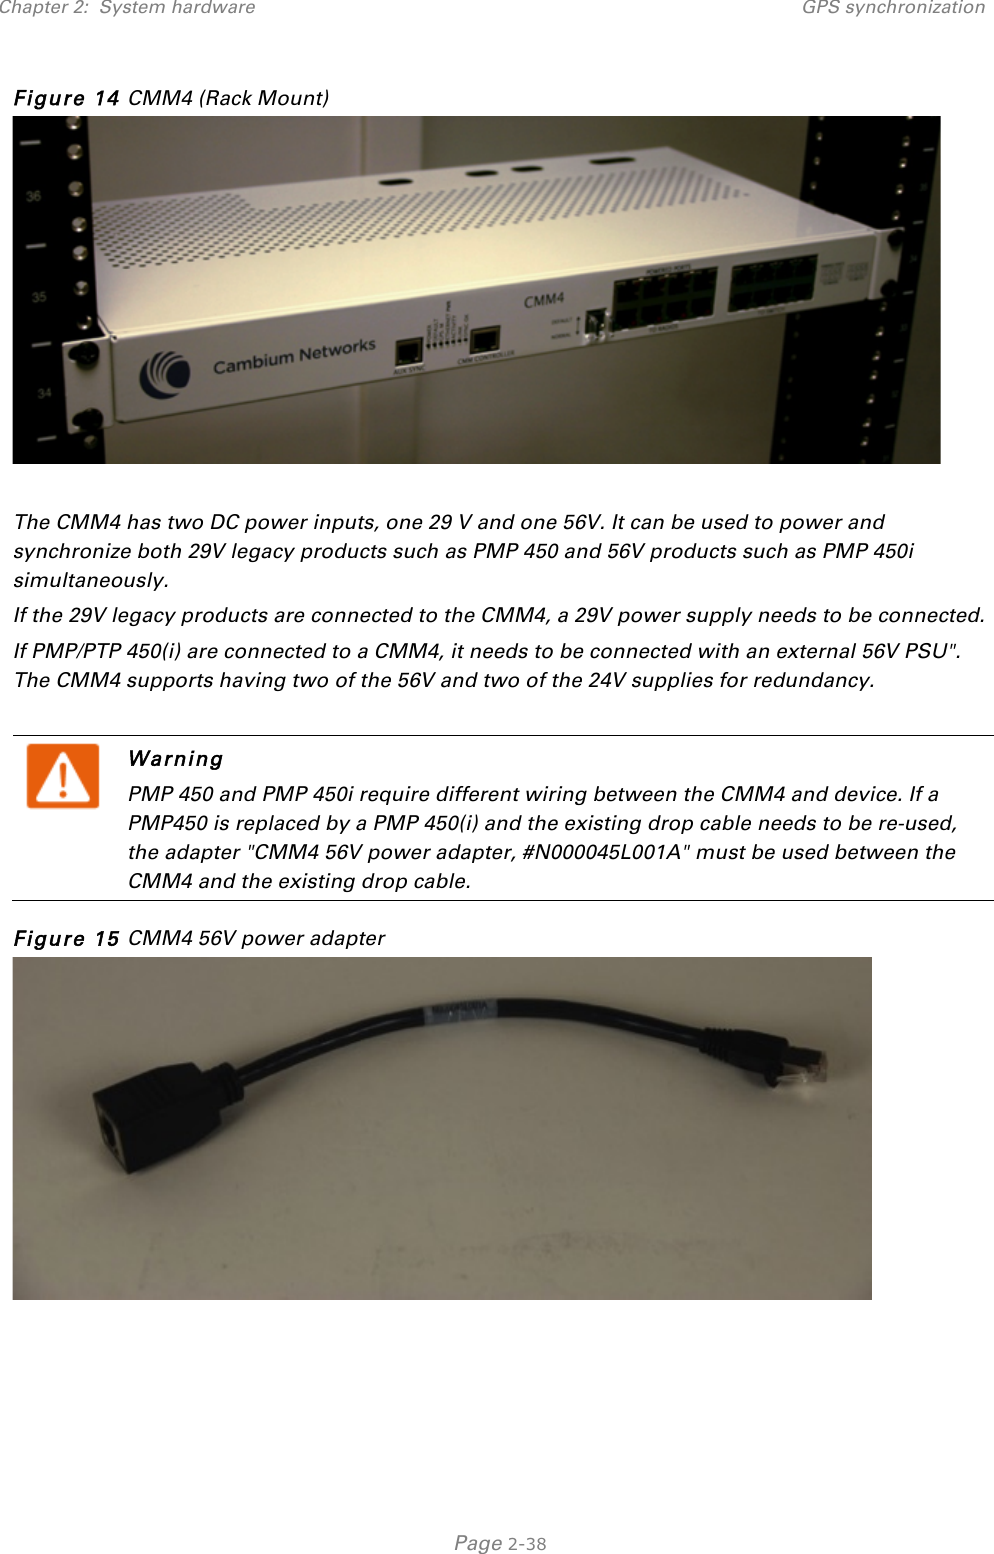 Chapter 2:  System hardware GPS synchronization   Page 2-38 Figure 14 CMM4 (Rack Mount)   The CMM4 has two DC power inputs, one 29 V and one 56V. It can be used to power and synchronize both 29V legacy products such as PMP 450 and 56V products such as PMP 450i simultaneously. If the 29V legacy products are connected to the CMM4, a 29V power supply needs to be connected.  If PMP/PTP 450(i) are connected to a CMM4, it needs to be connected with an external 56V PSU&quot;. The CMM4 supports having two of the 56V and two of the 24V supplies for redundancy.   Warning PMP 450 and PMP 450i require different wiring between the CMM4 and device. If a PMP450 is replaced by a PMP 450(i) and the existing drop cable needs to be re-used, the adapter &quot;CMM4 56V power adapter, #N000045L001A&quot; must be used between the CMM4 and the existing drop cable. Figure 15 CMM4 56V power adapter   